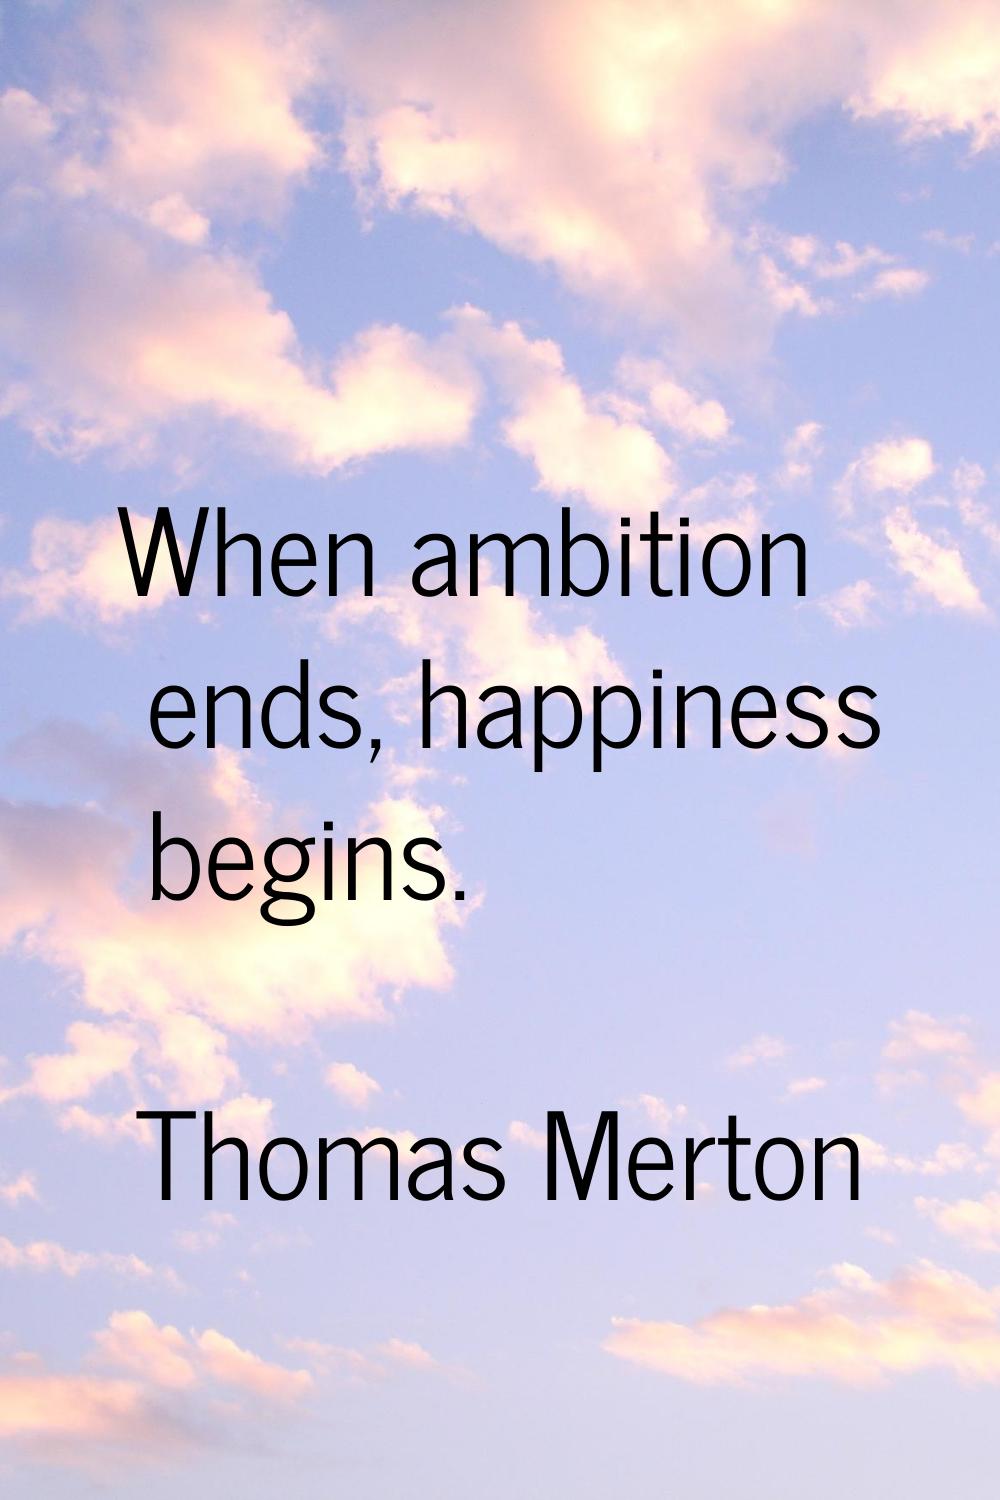 When ambition ends, happiness begins.